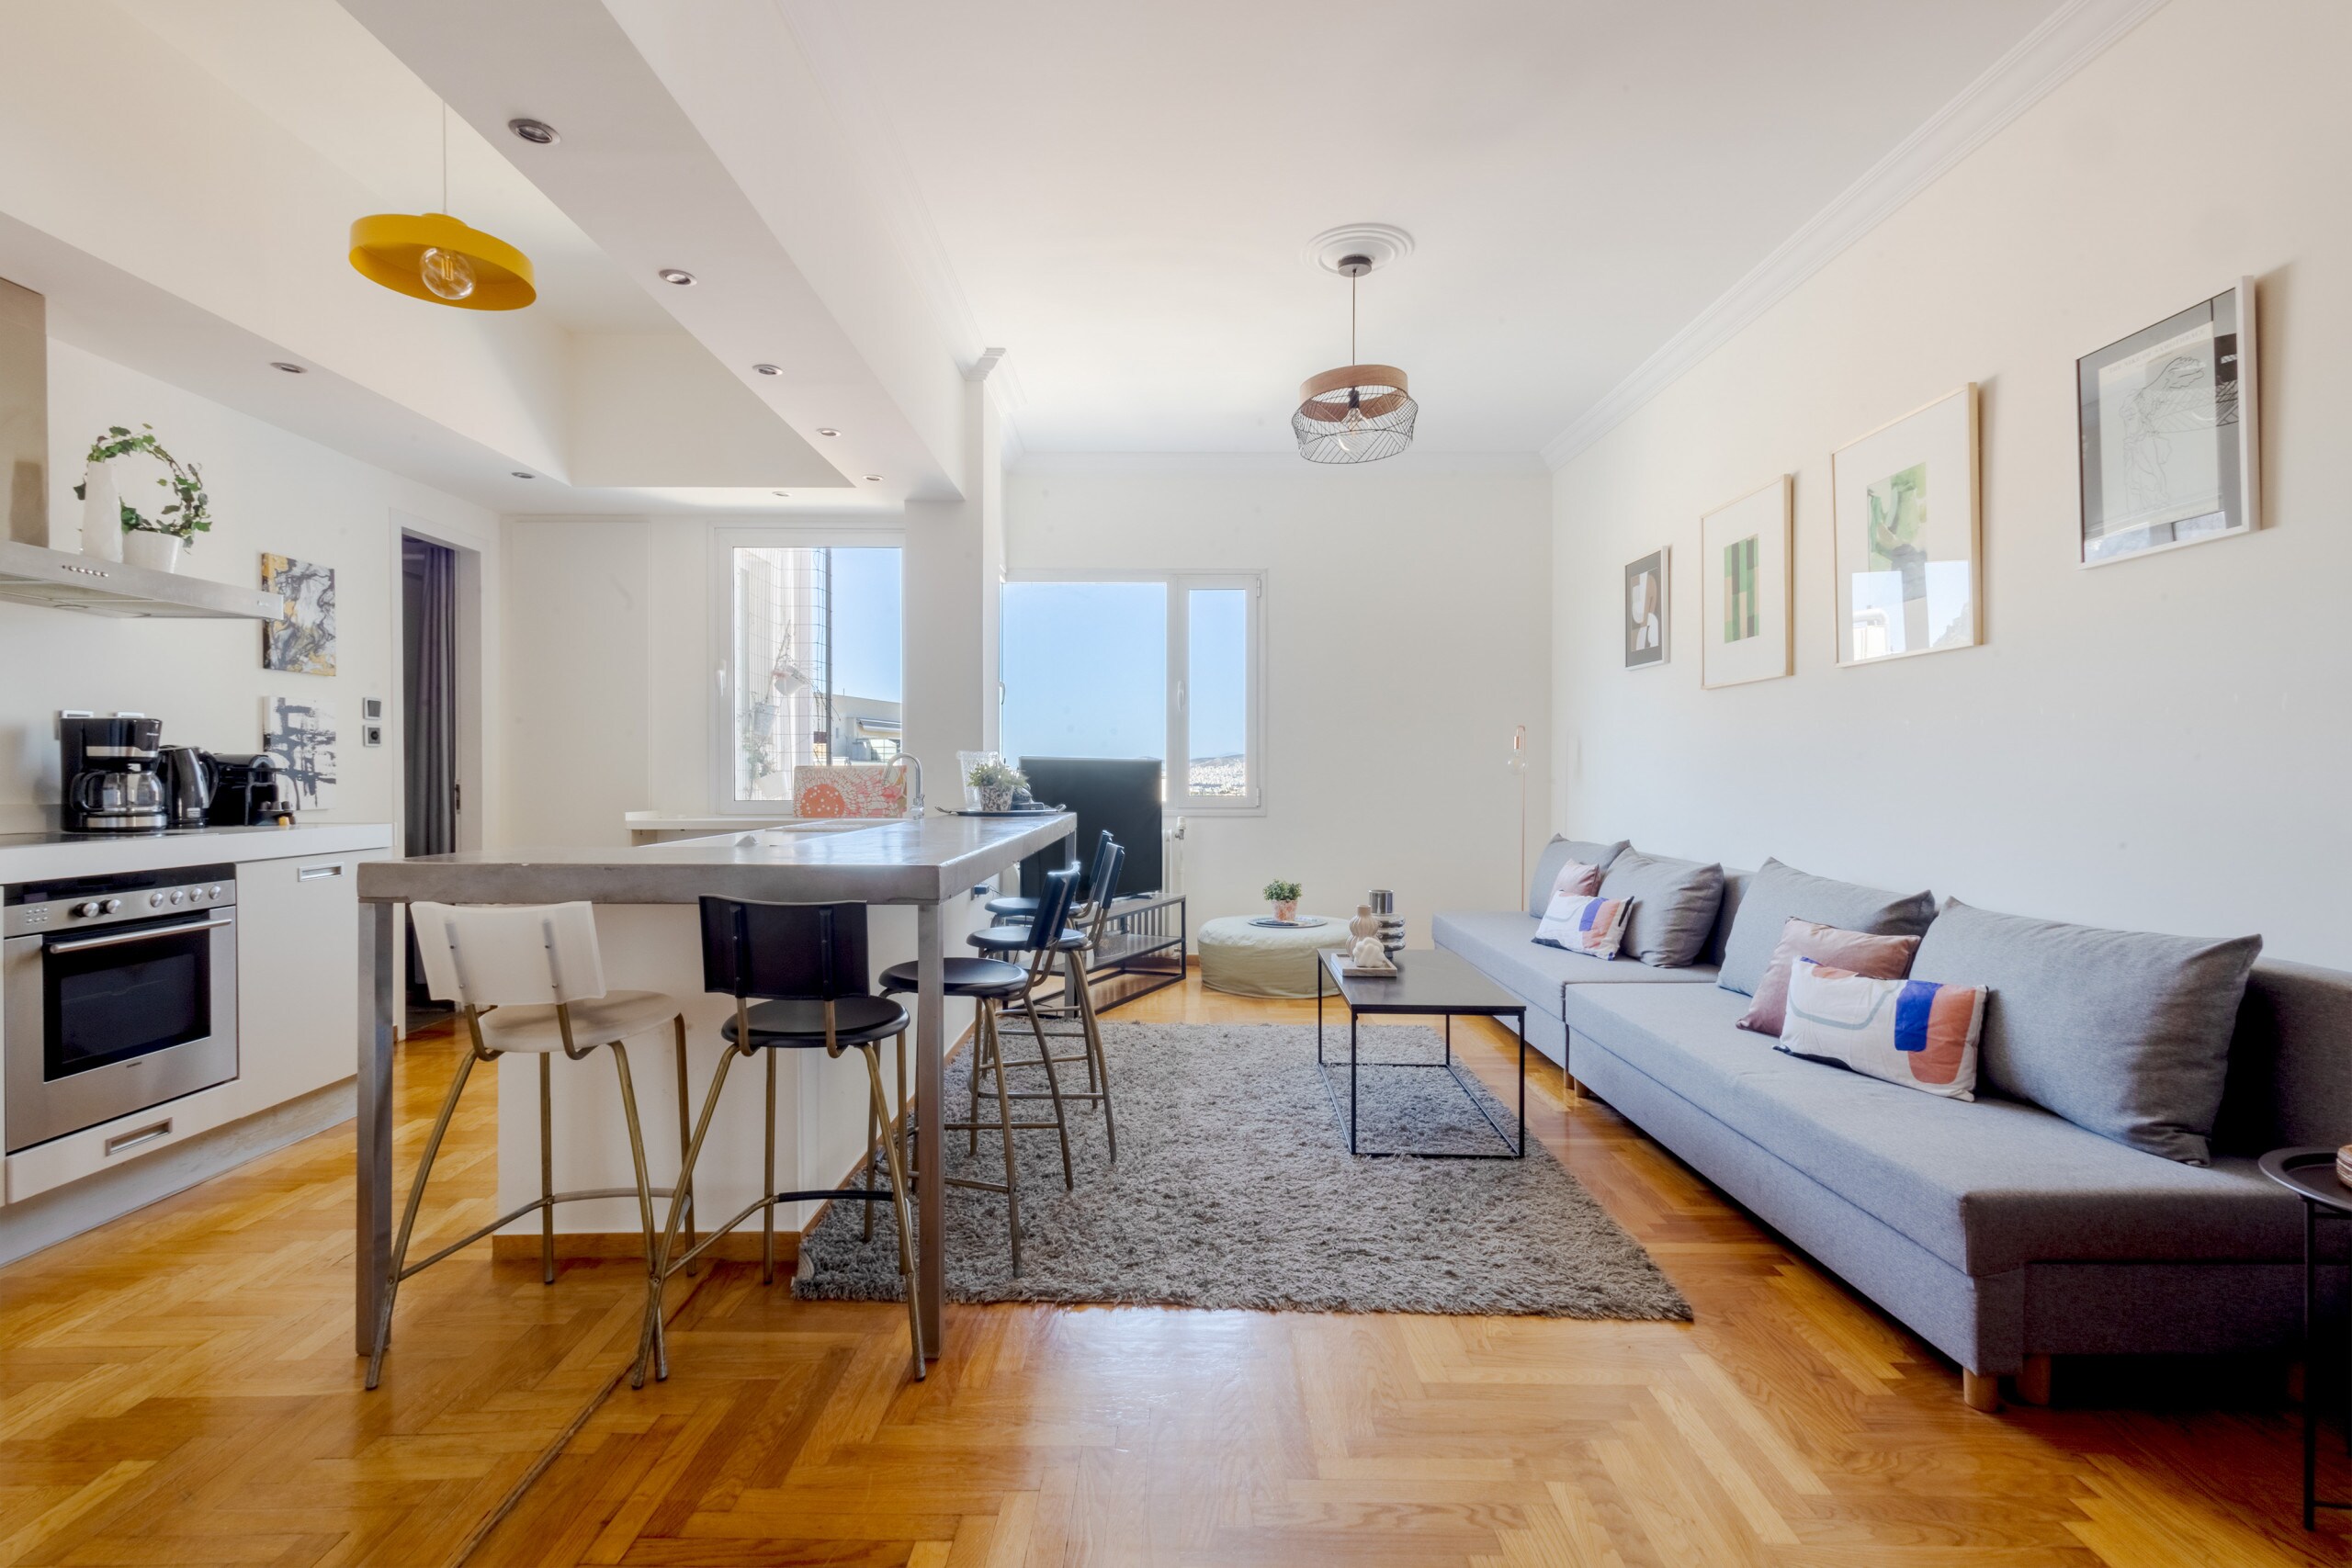 Property Image 1 - Modern Stylish Apartment with Incredible Acropolis Views